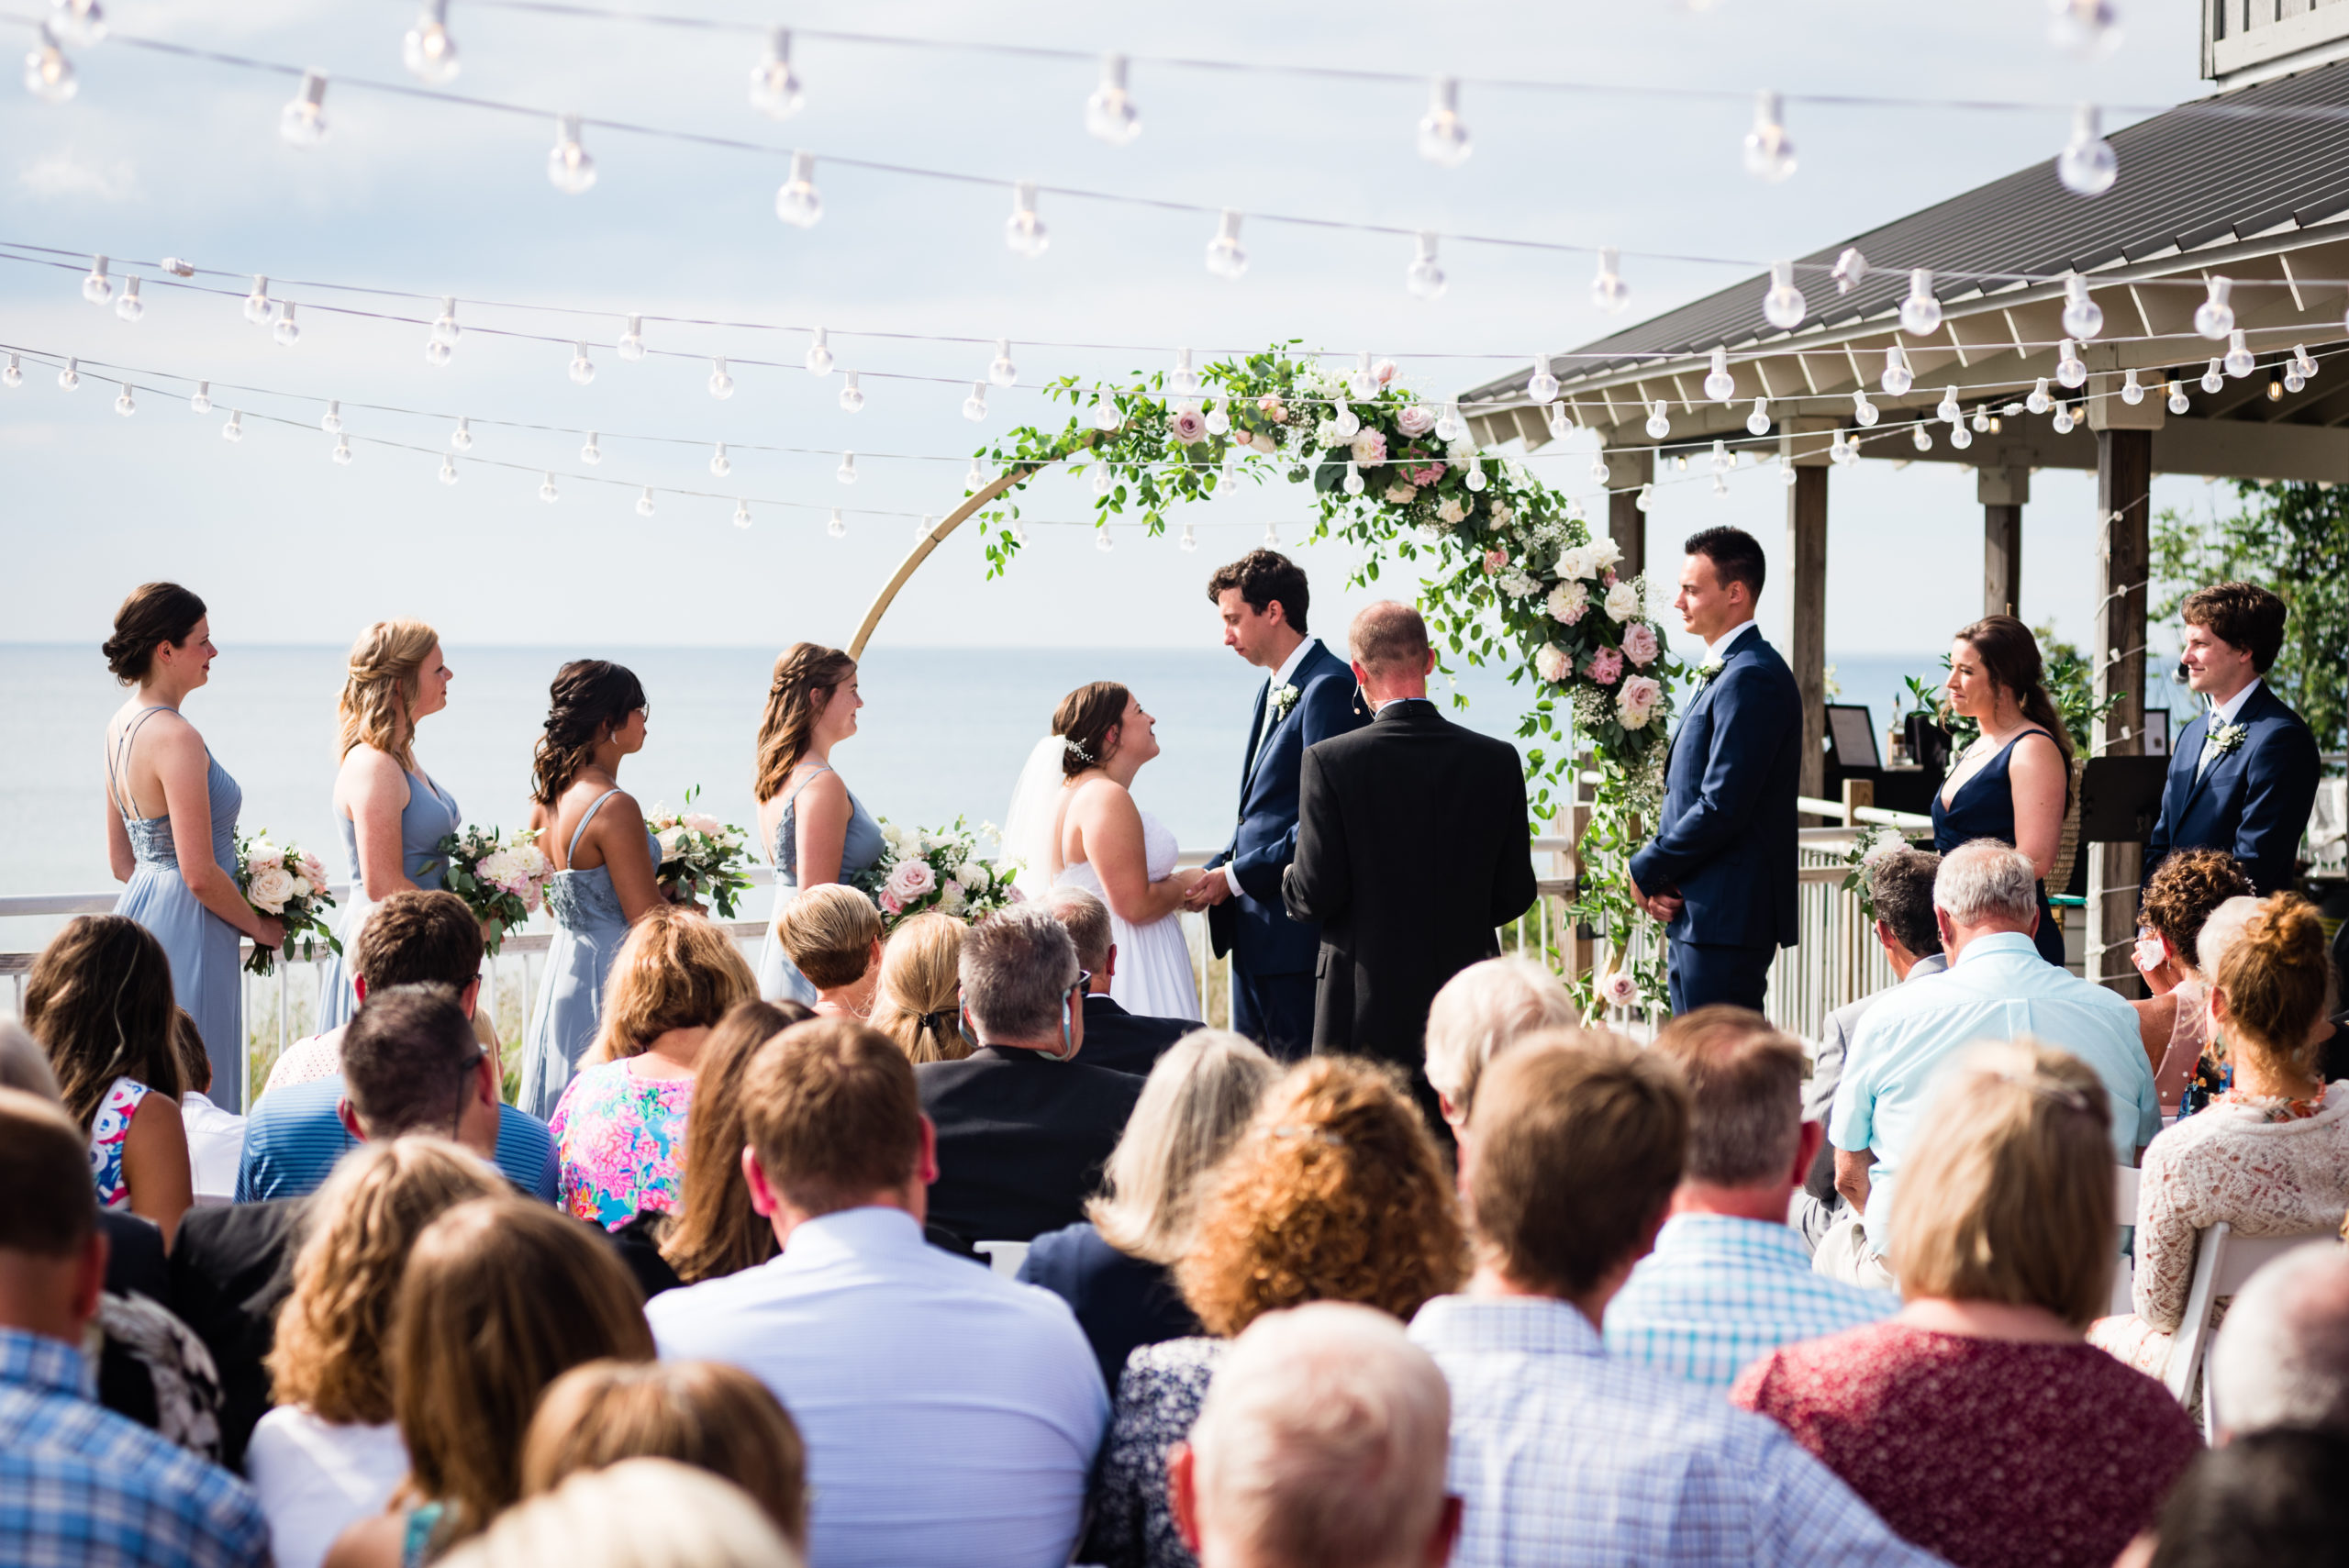 For the couple wanting to get married ON the beach but not on the sand, the Loeks Conference Center is the perfect choice.